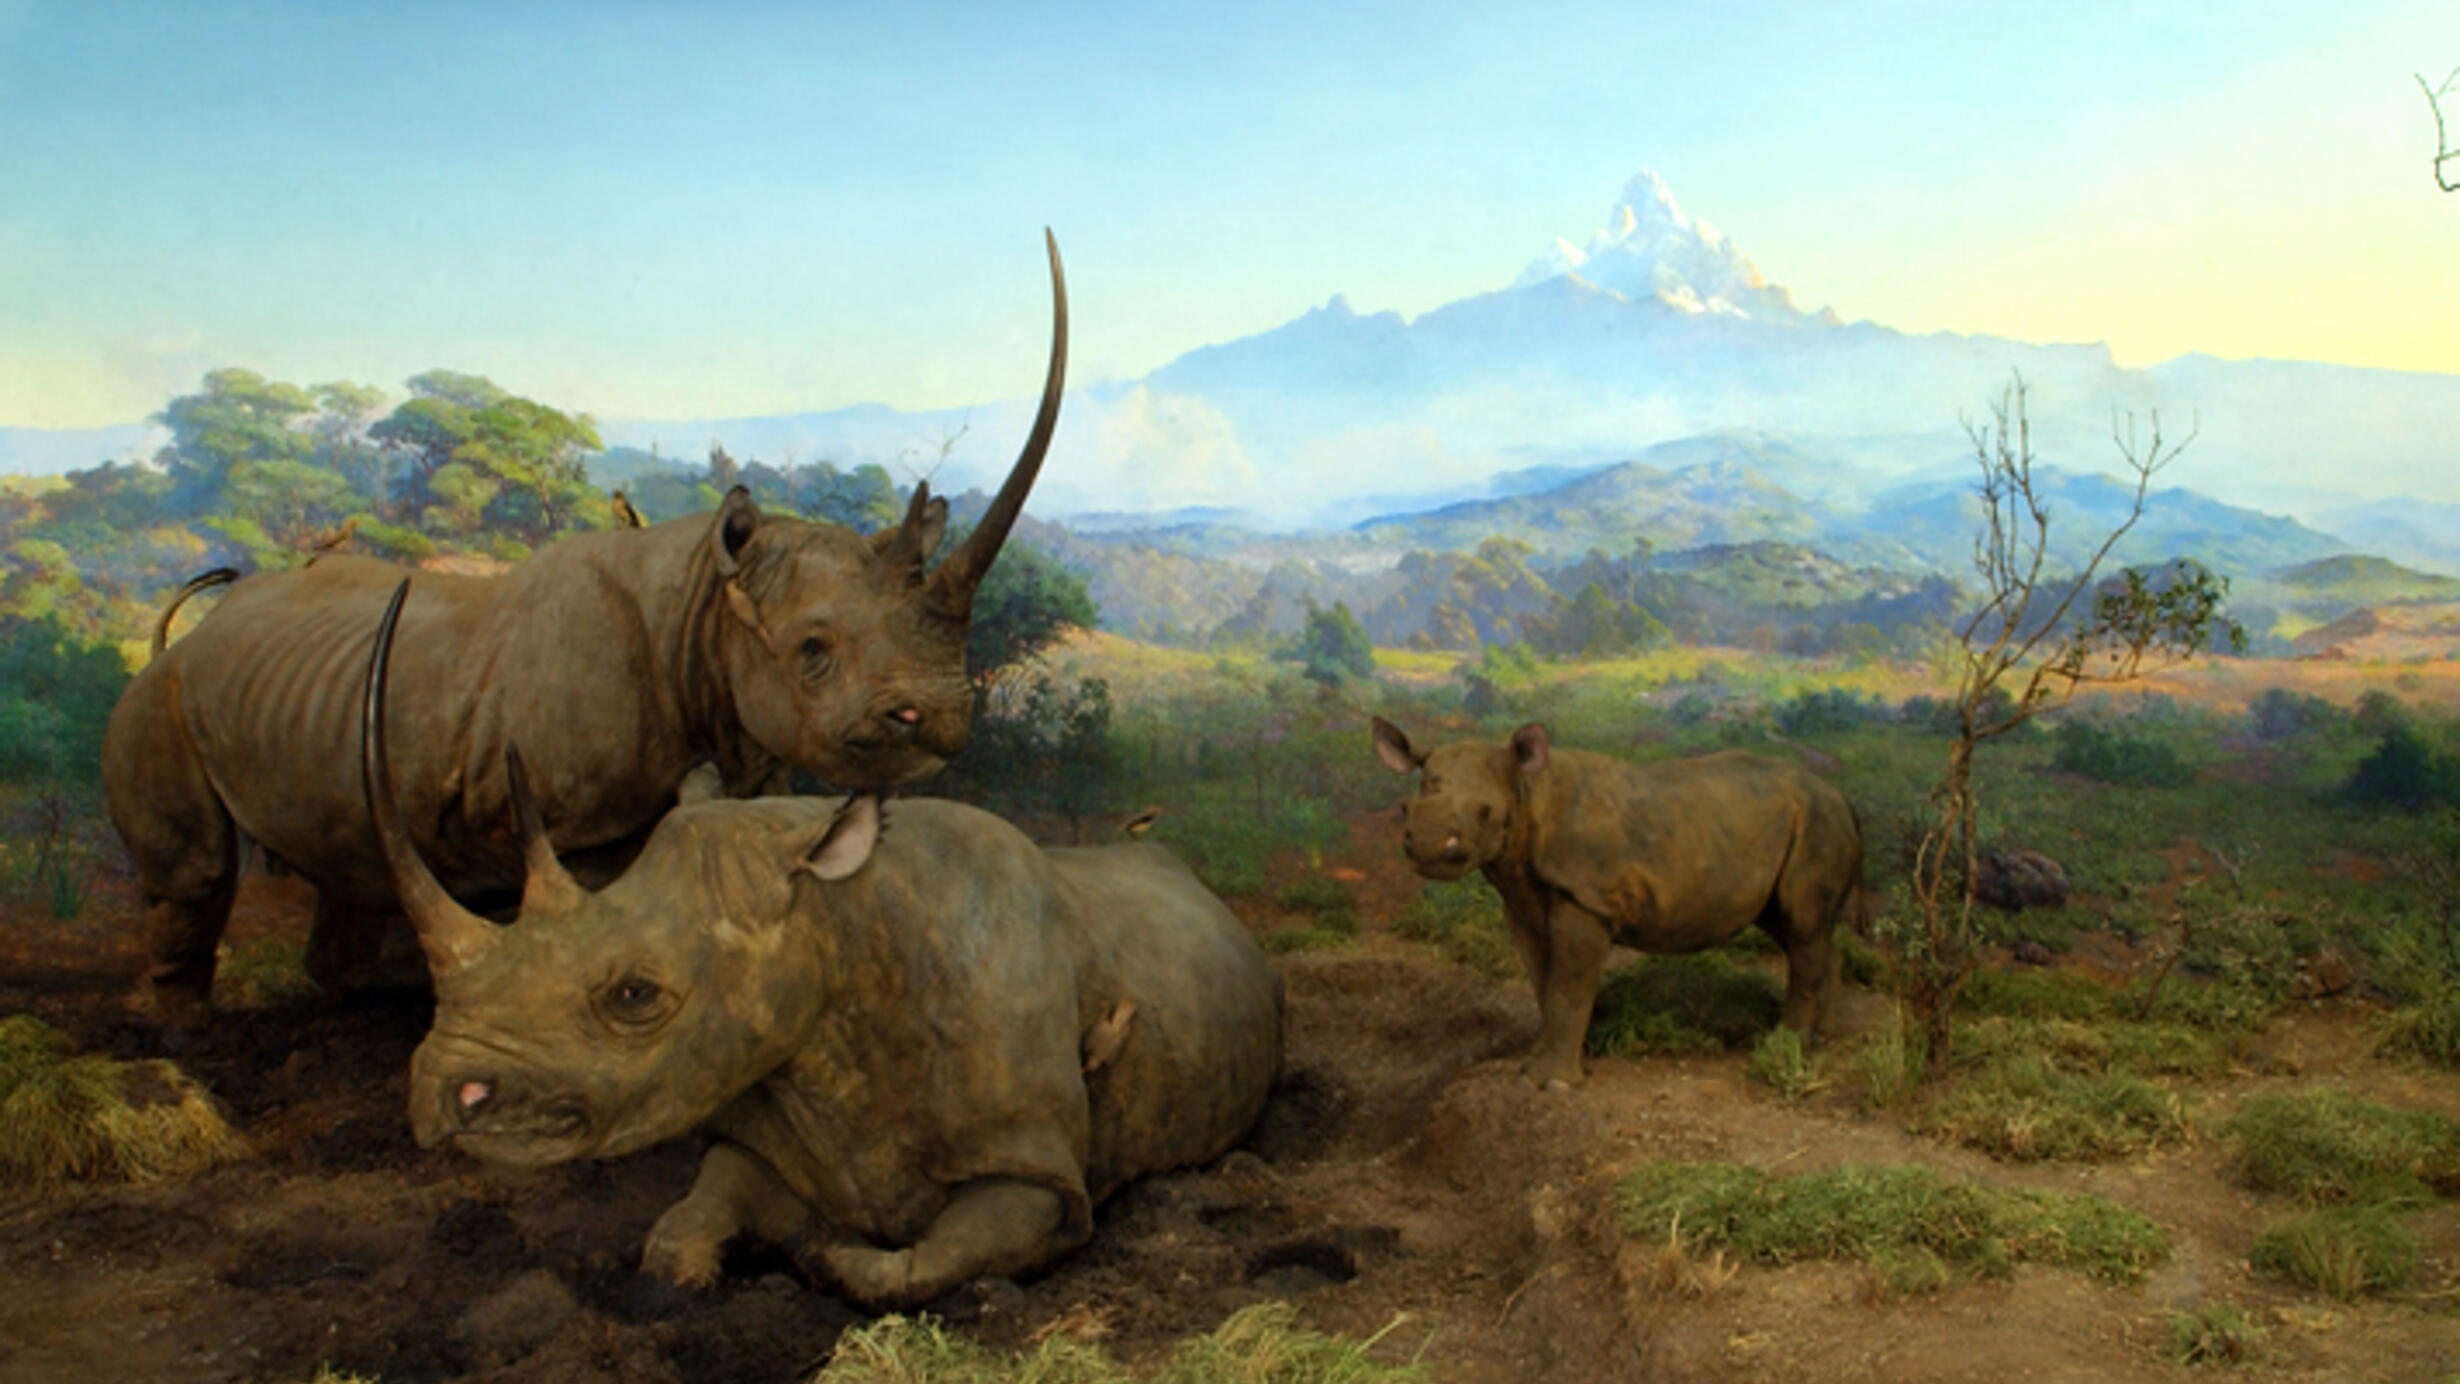 A diorama shows two adult Black rhinoceroses and a juvenile on dry brown earth with scrubby green vegetation.